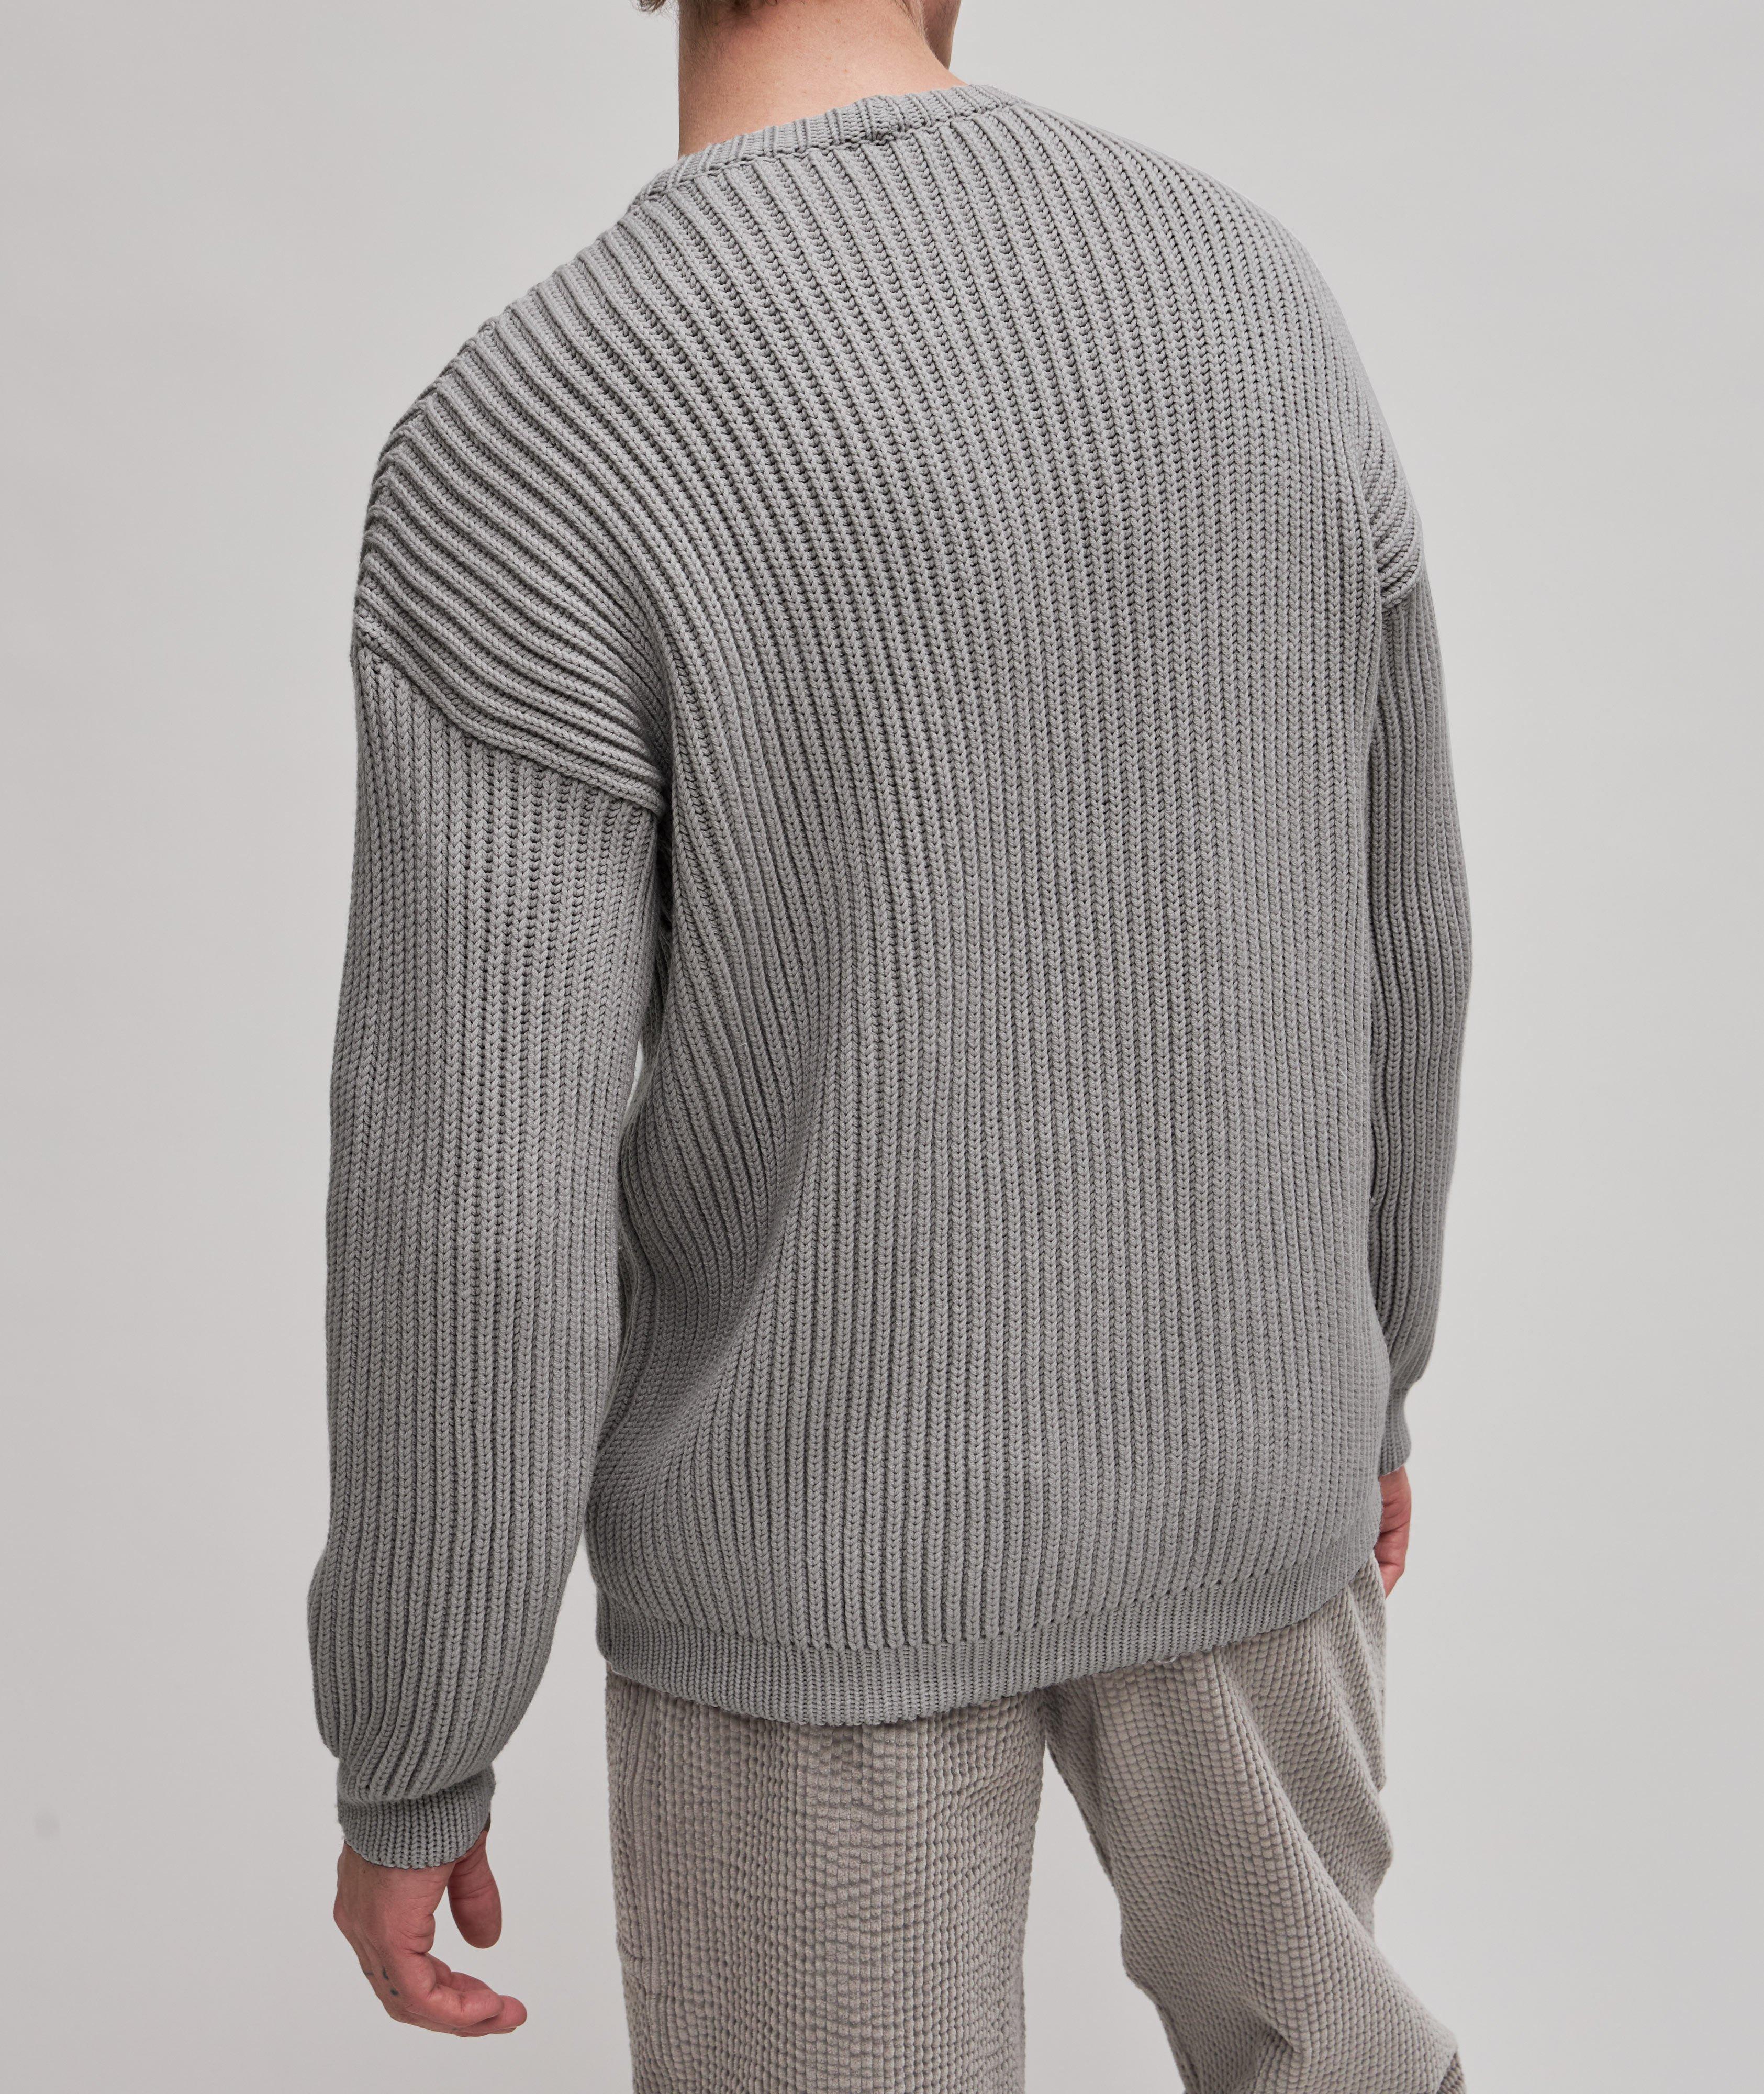 Virgin Wool Thick Rib-Knitted Crewneck Sweater image 3